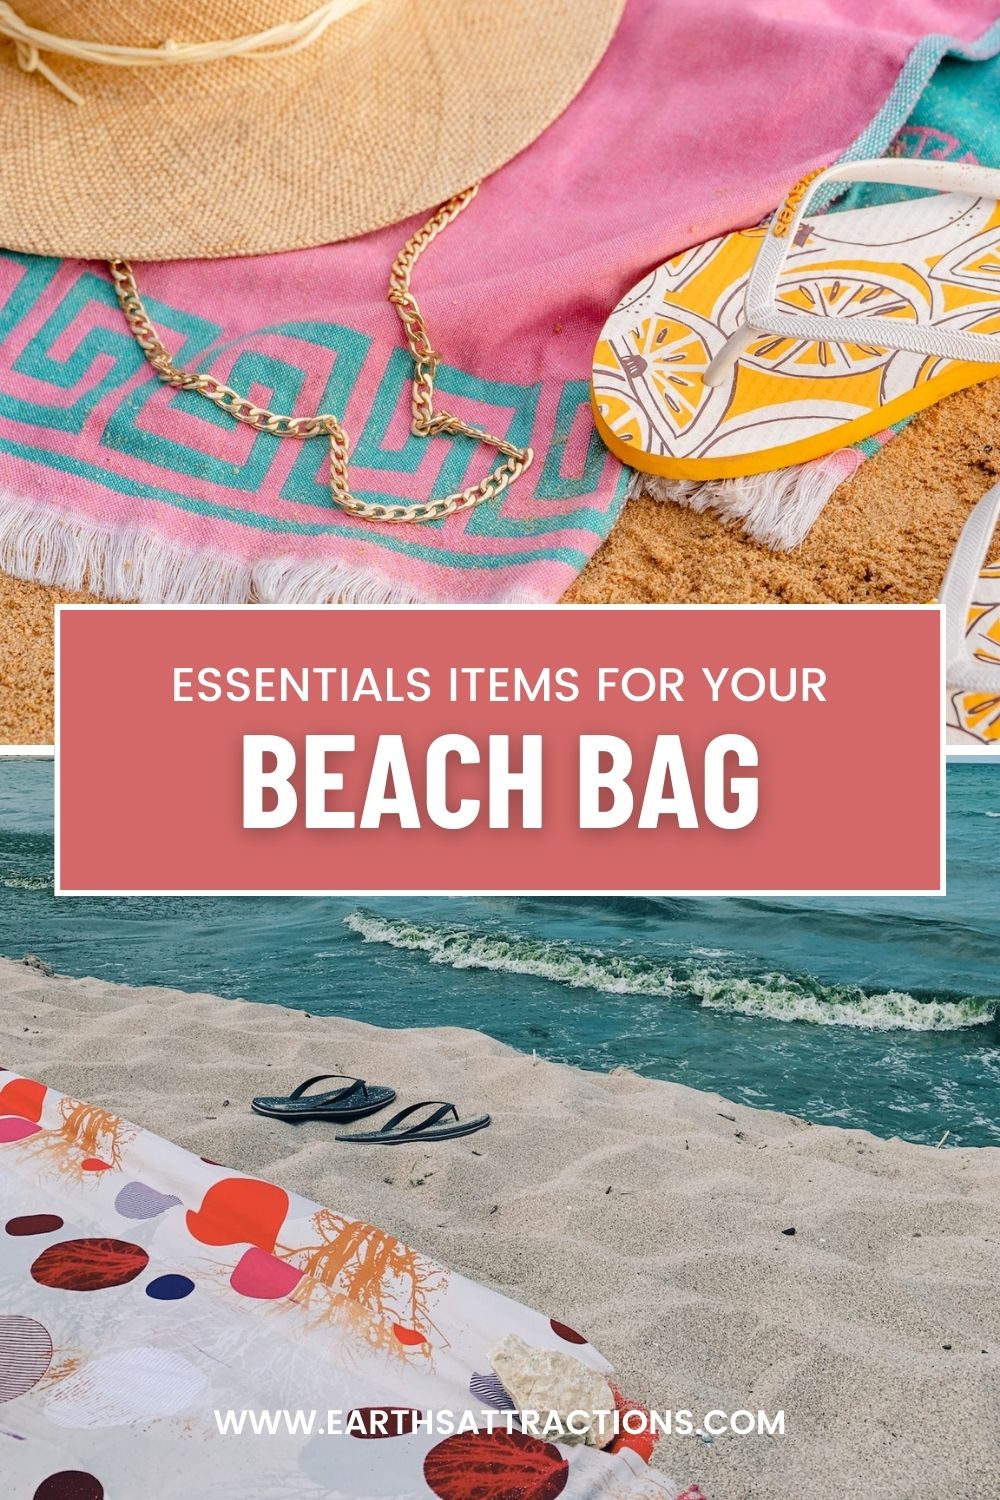 The Ultimate Beach Vacation Packing List: Top 5 Beach Bag Essentials You Can't Forget. Use this list of things you need at the beach for your trip #beach #beachbag #beachitems #beachbagessentials #beachpackinglist